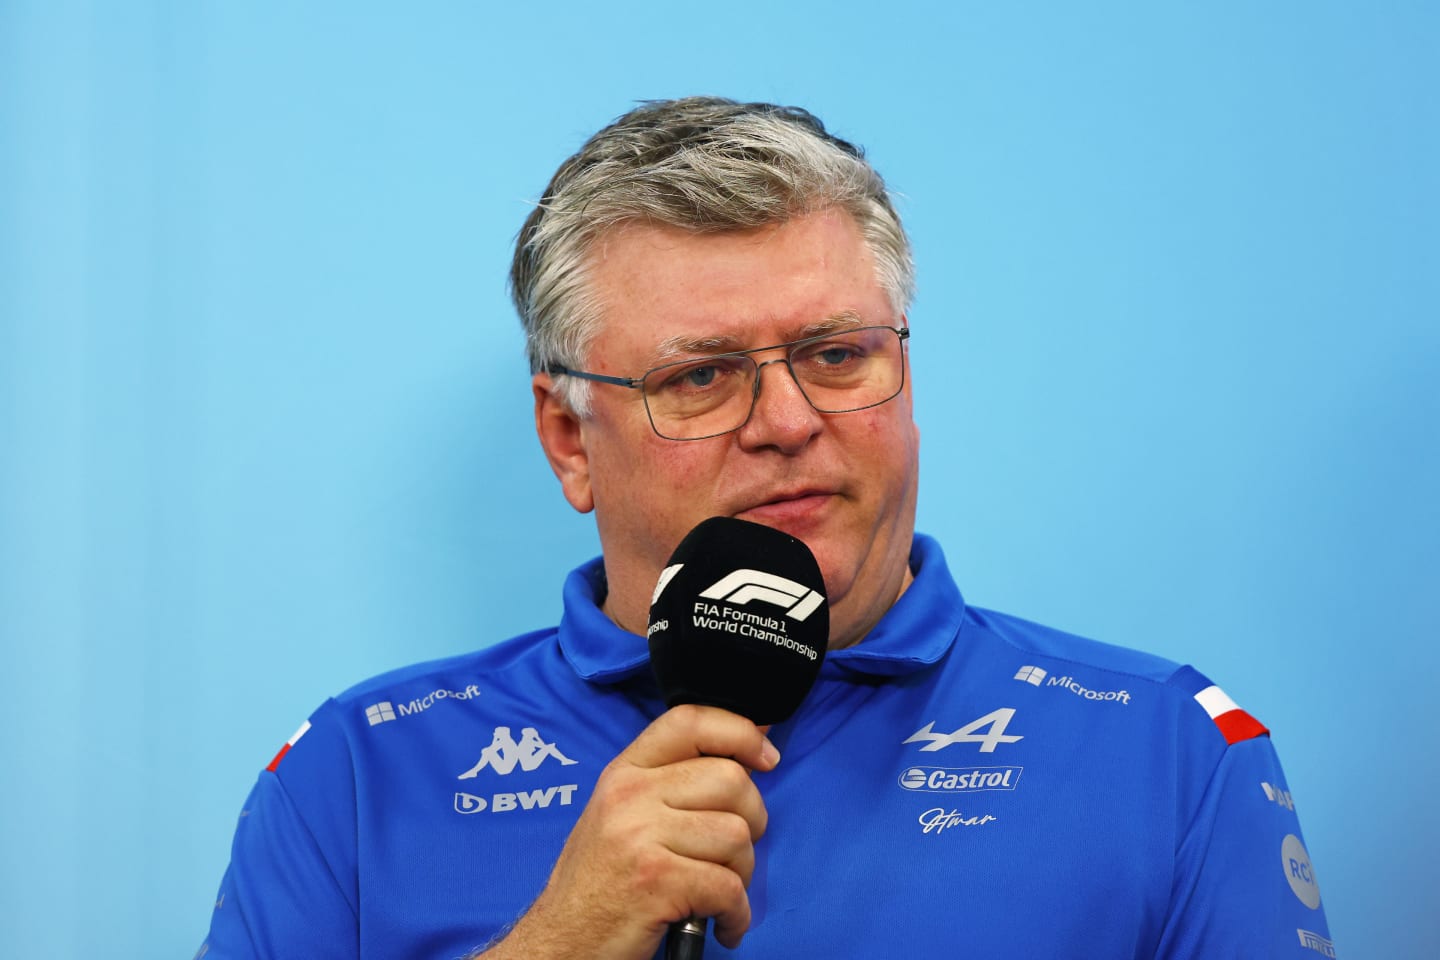 SUZUKA, JAPAN - OCTOBER 08: Otmar Szafnauer, Team Principal of Alpine F1 attends the Team Principals Press Conference prior to final practice ahead of the F1 Grand Prix of Japan at Suzuka International Racing Course on October 08, 2022 in Suzuka, Japan. (Photo by Bryn Lennon/Getty Images)